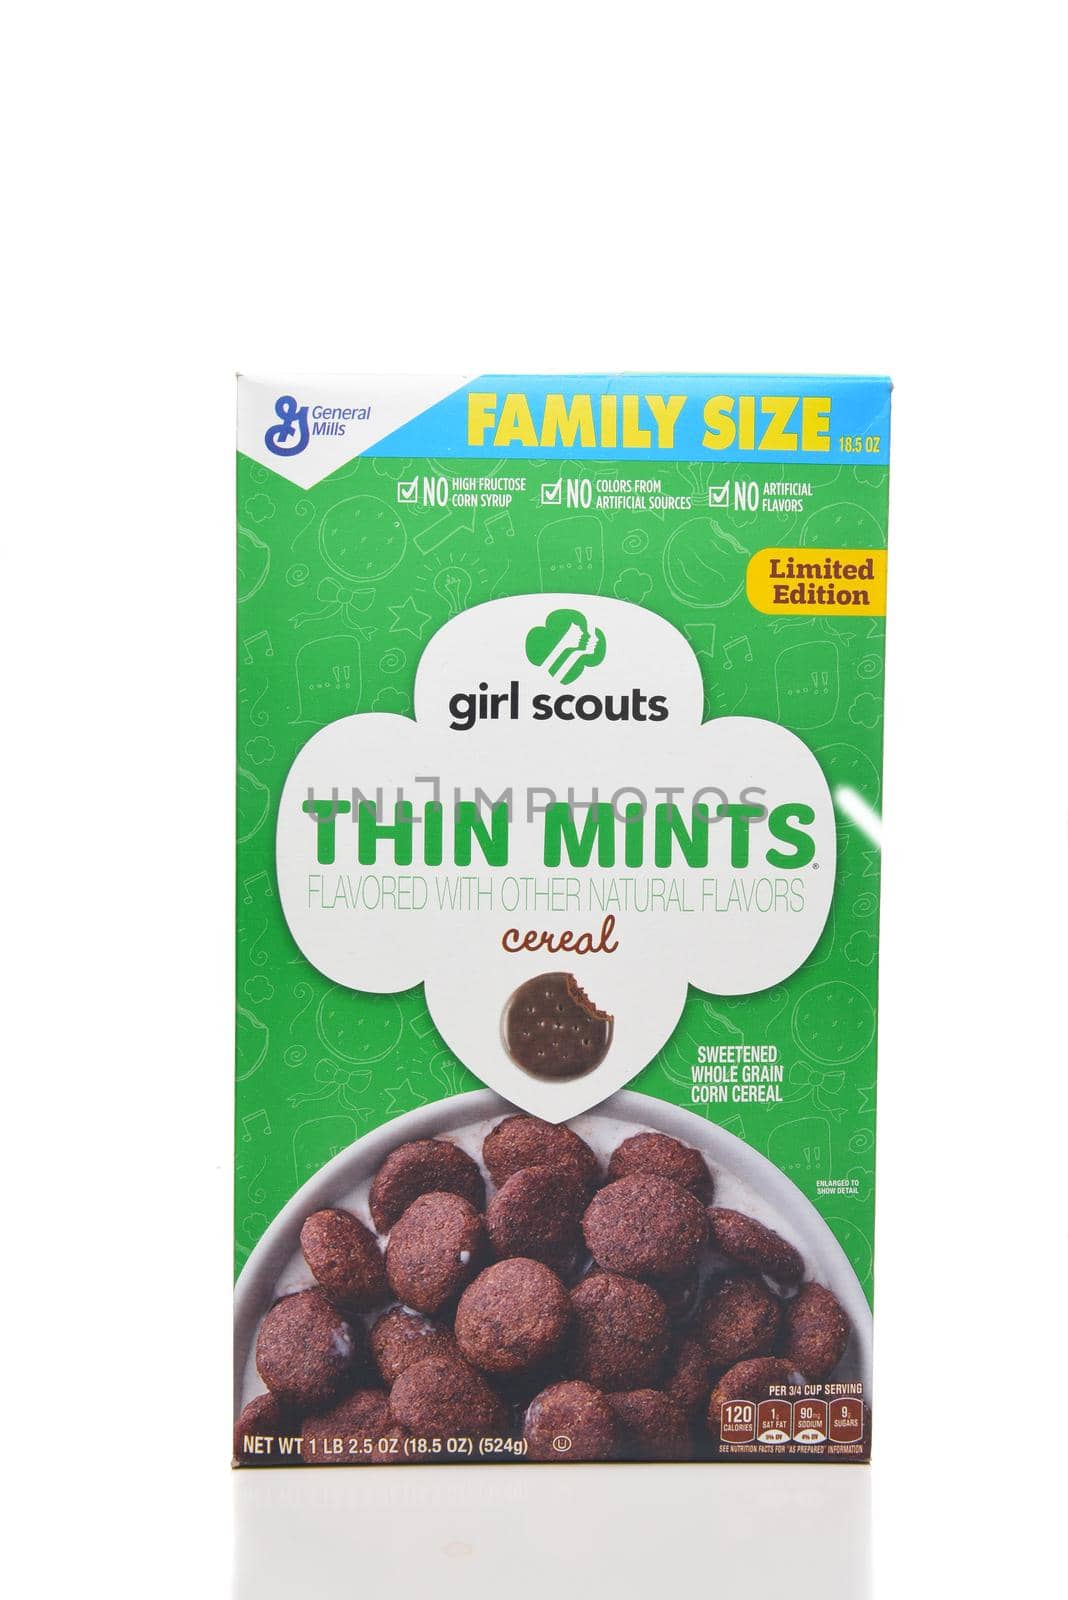 IRVINE, CALIFORNIA - APRIL 5, 2018: A box of Limited Edition Girl Scouts Thin Mints Cereal made by General Mills. 